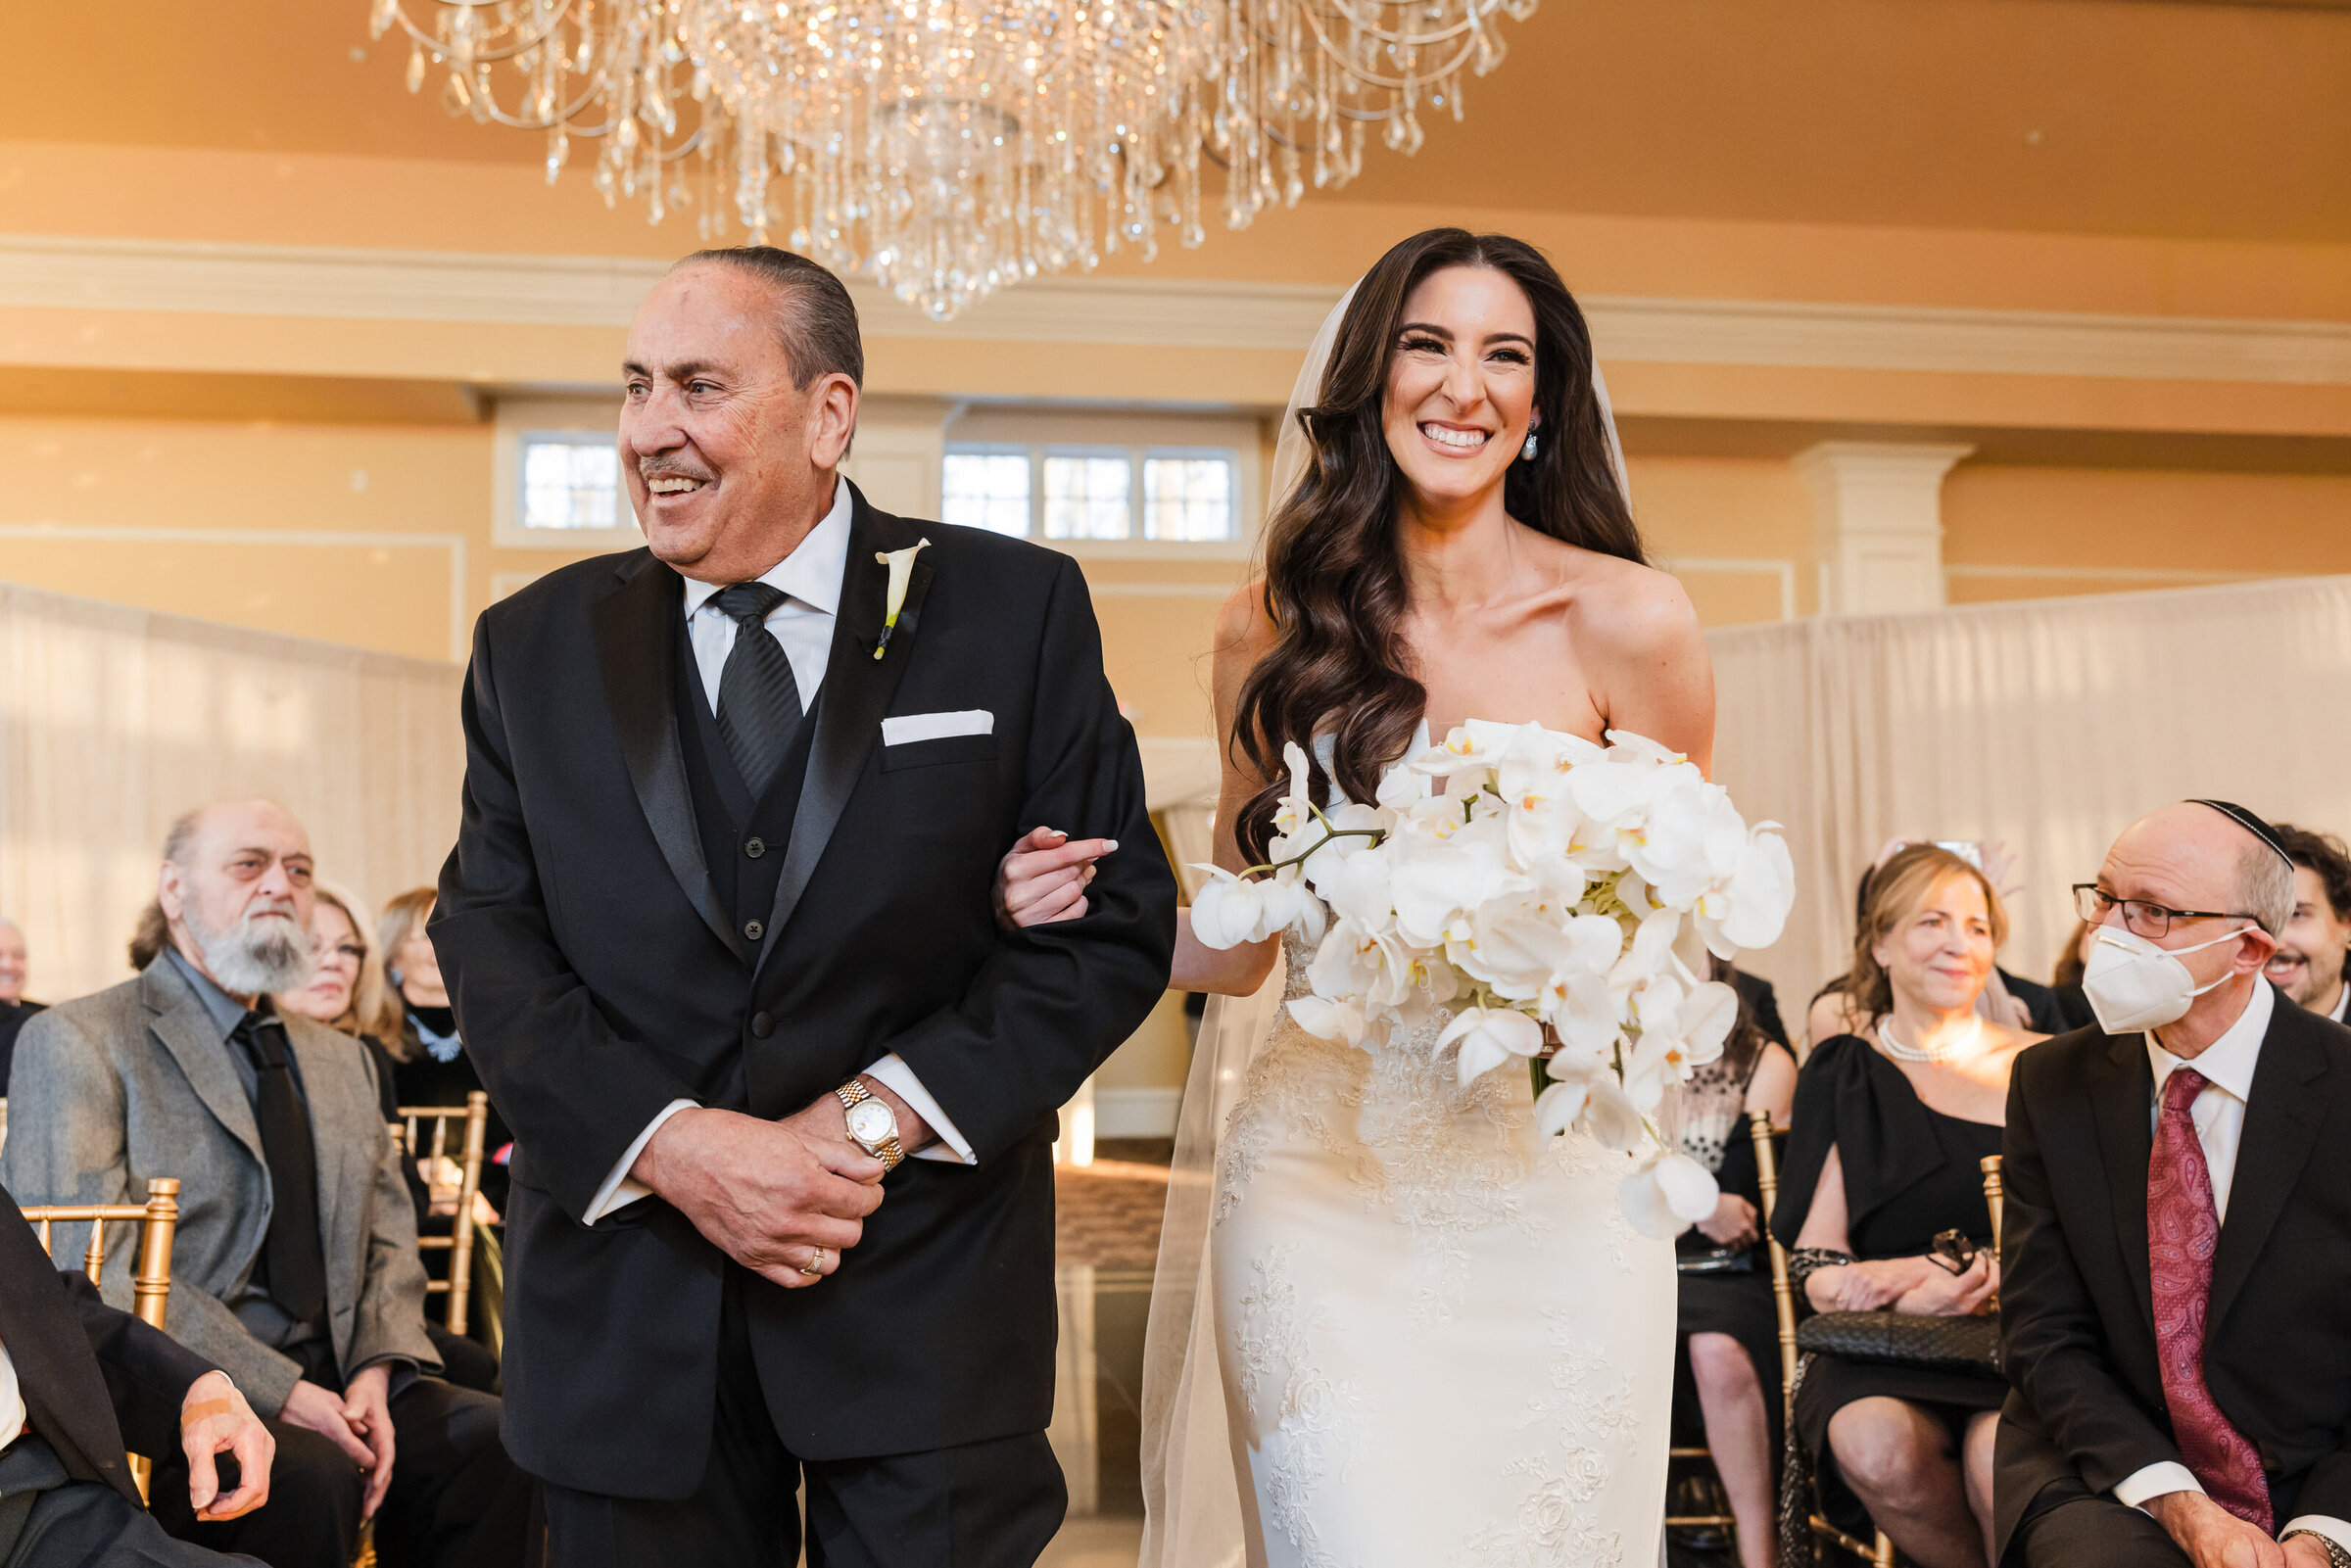 Smily bride holding an orchid bouquet walks down the aisle with her father at Parc Chateau